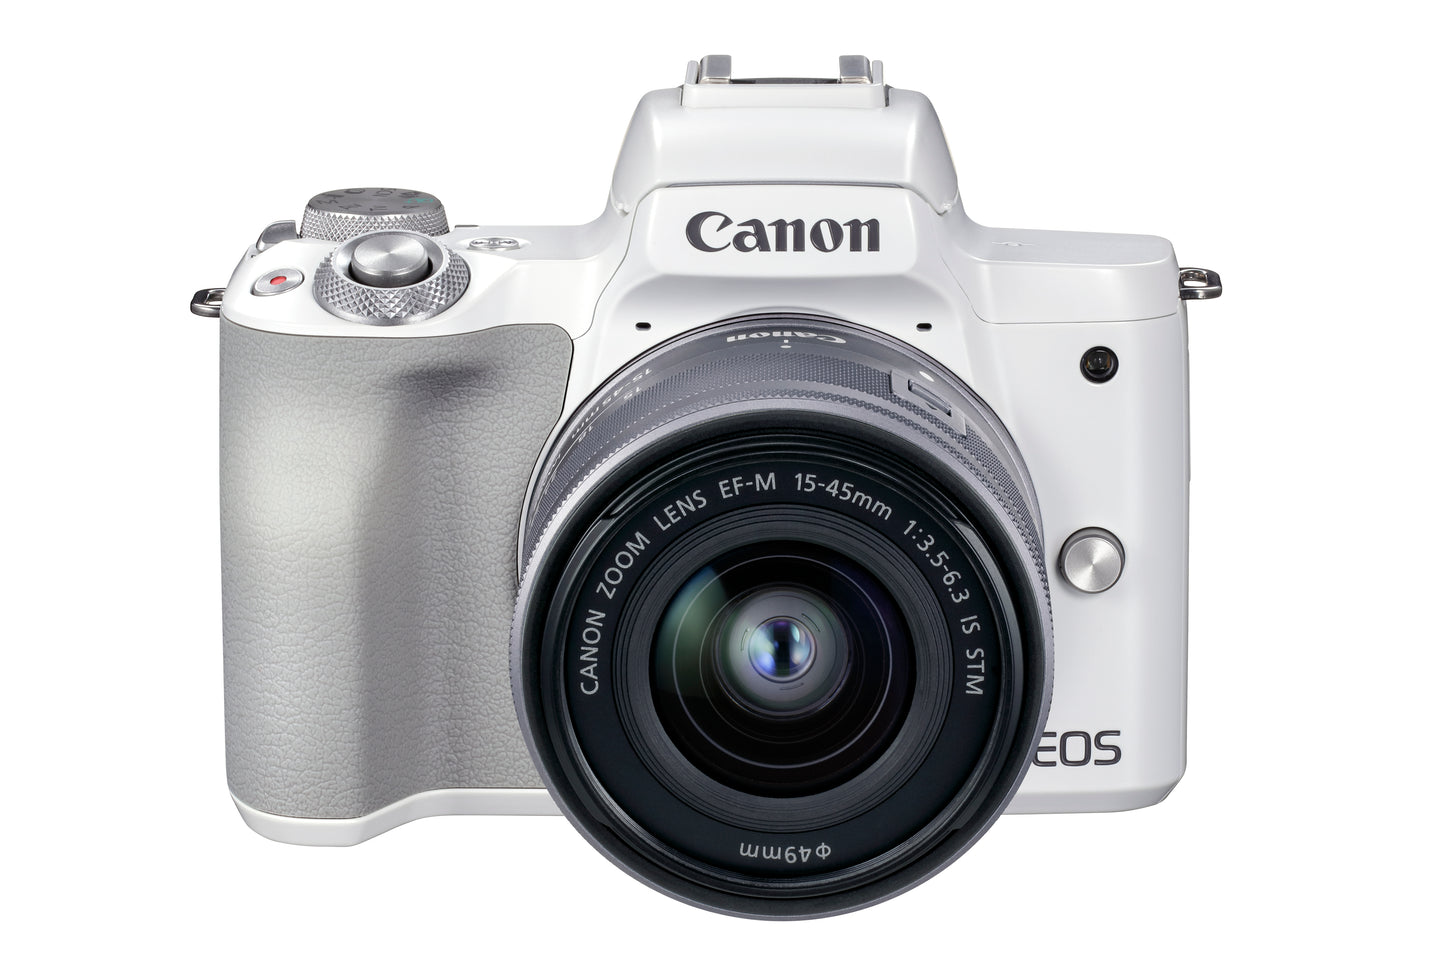 CANON EOS M50 Mark II Mirrorless Digital Camera with 15-45mm Lens (White)